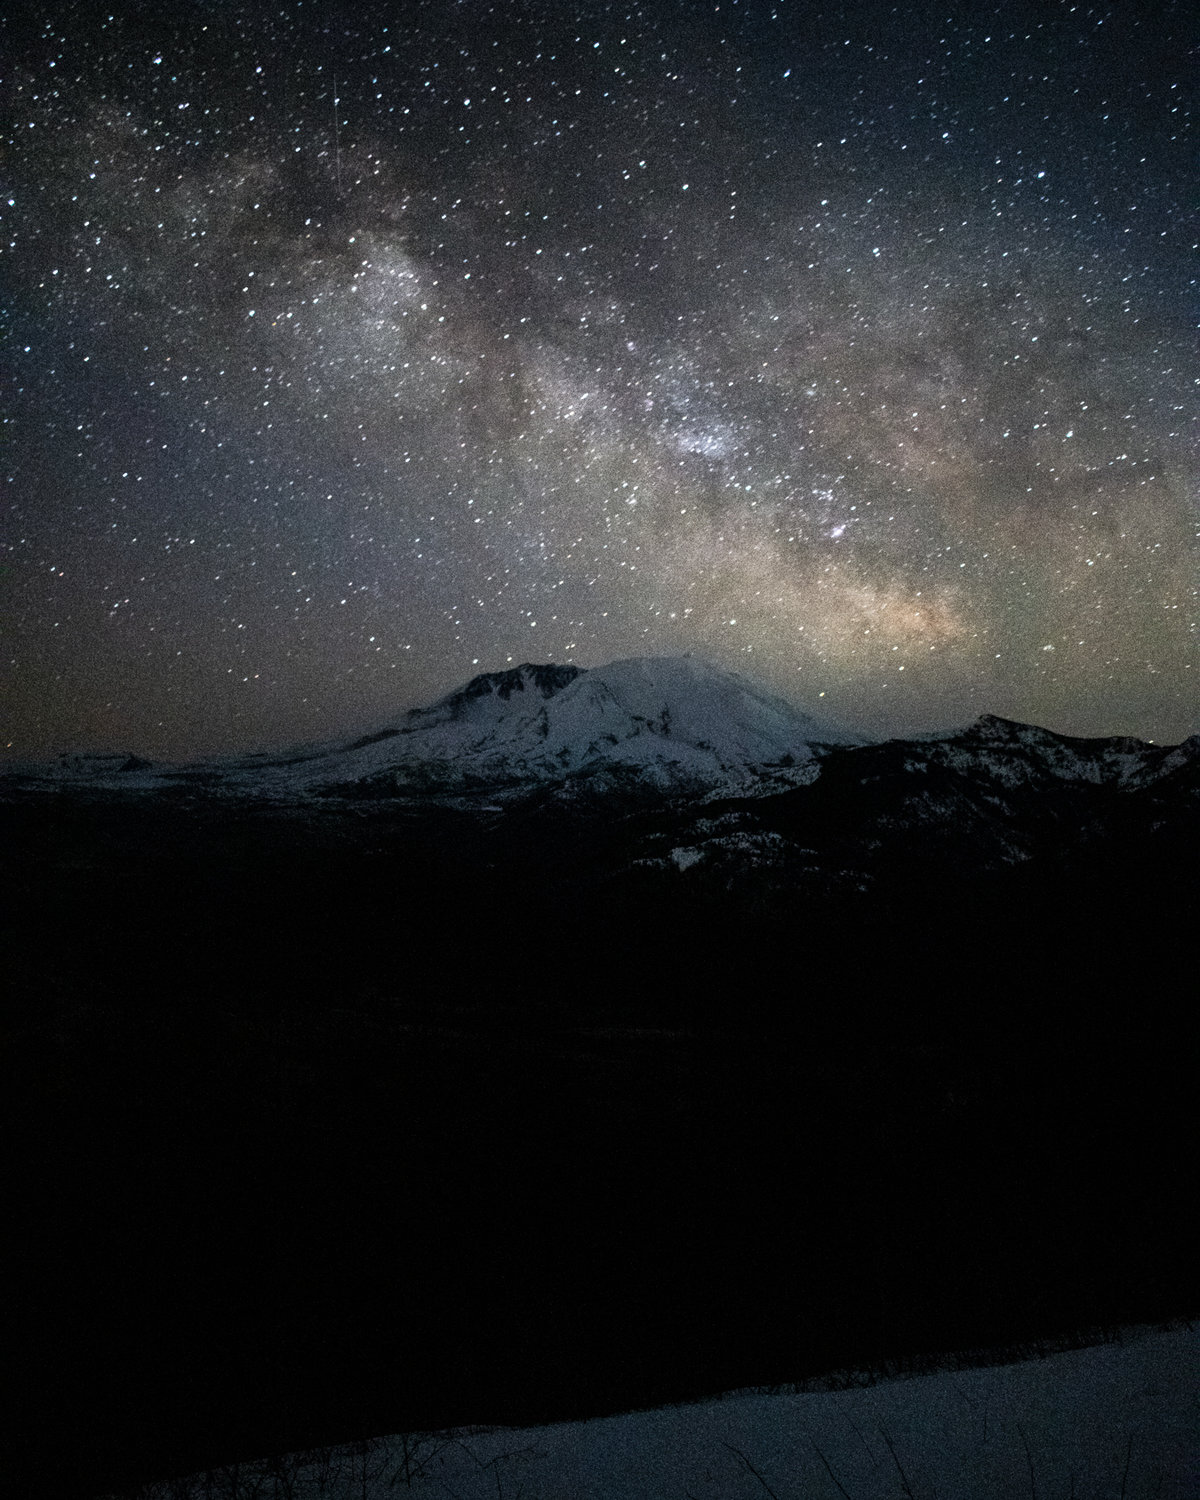 Castle Rock resident Jeran Keogh recently captured this photo of the Milky Way over Mount St. Helens. It was captured at about 2 a.m. April 12 from State Route 504.  “(It was a) freezing cold night at mountain but (I was) highly determined to get the best shot I could,” he wrote. Check out Jeran Keogh Photography on Instagram and Facebook to see more of his work.